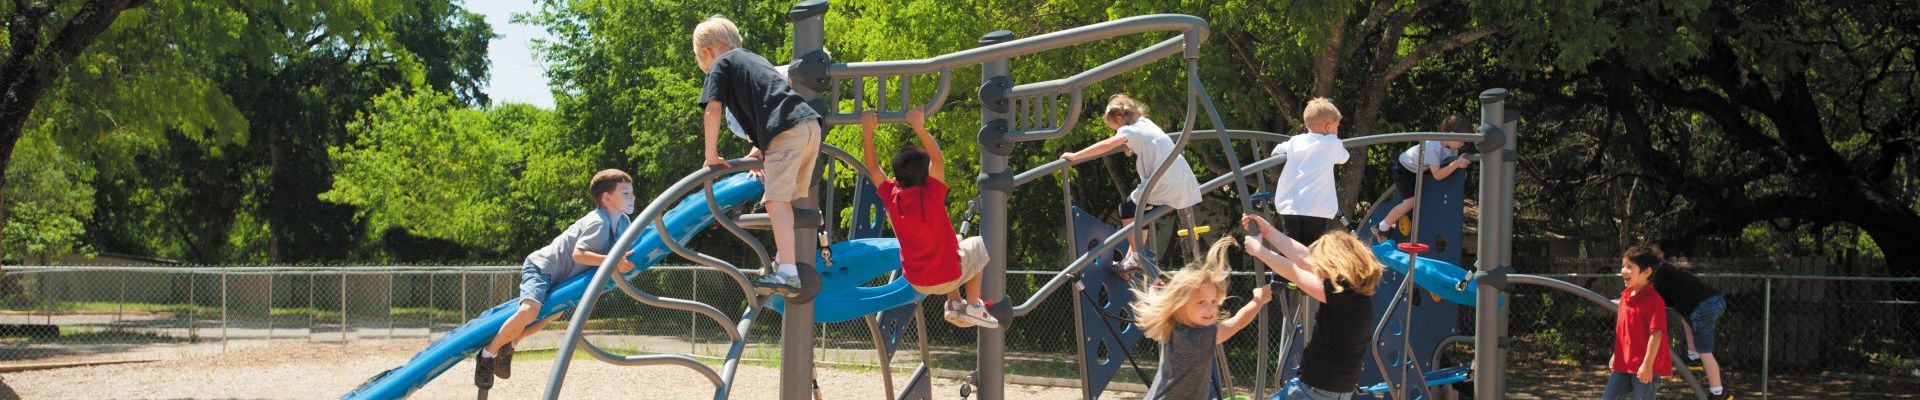 Featured image of children playing on gray climbing ropes at park